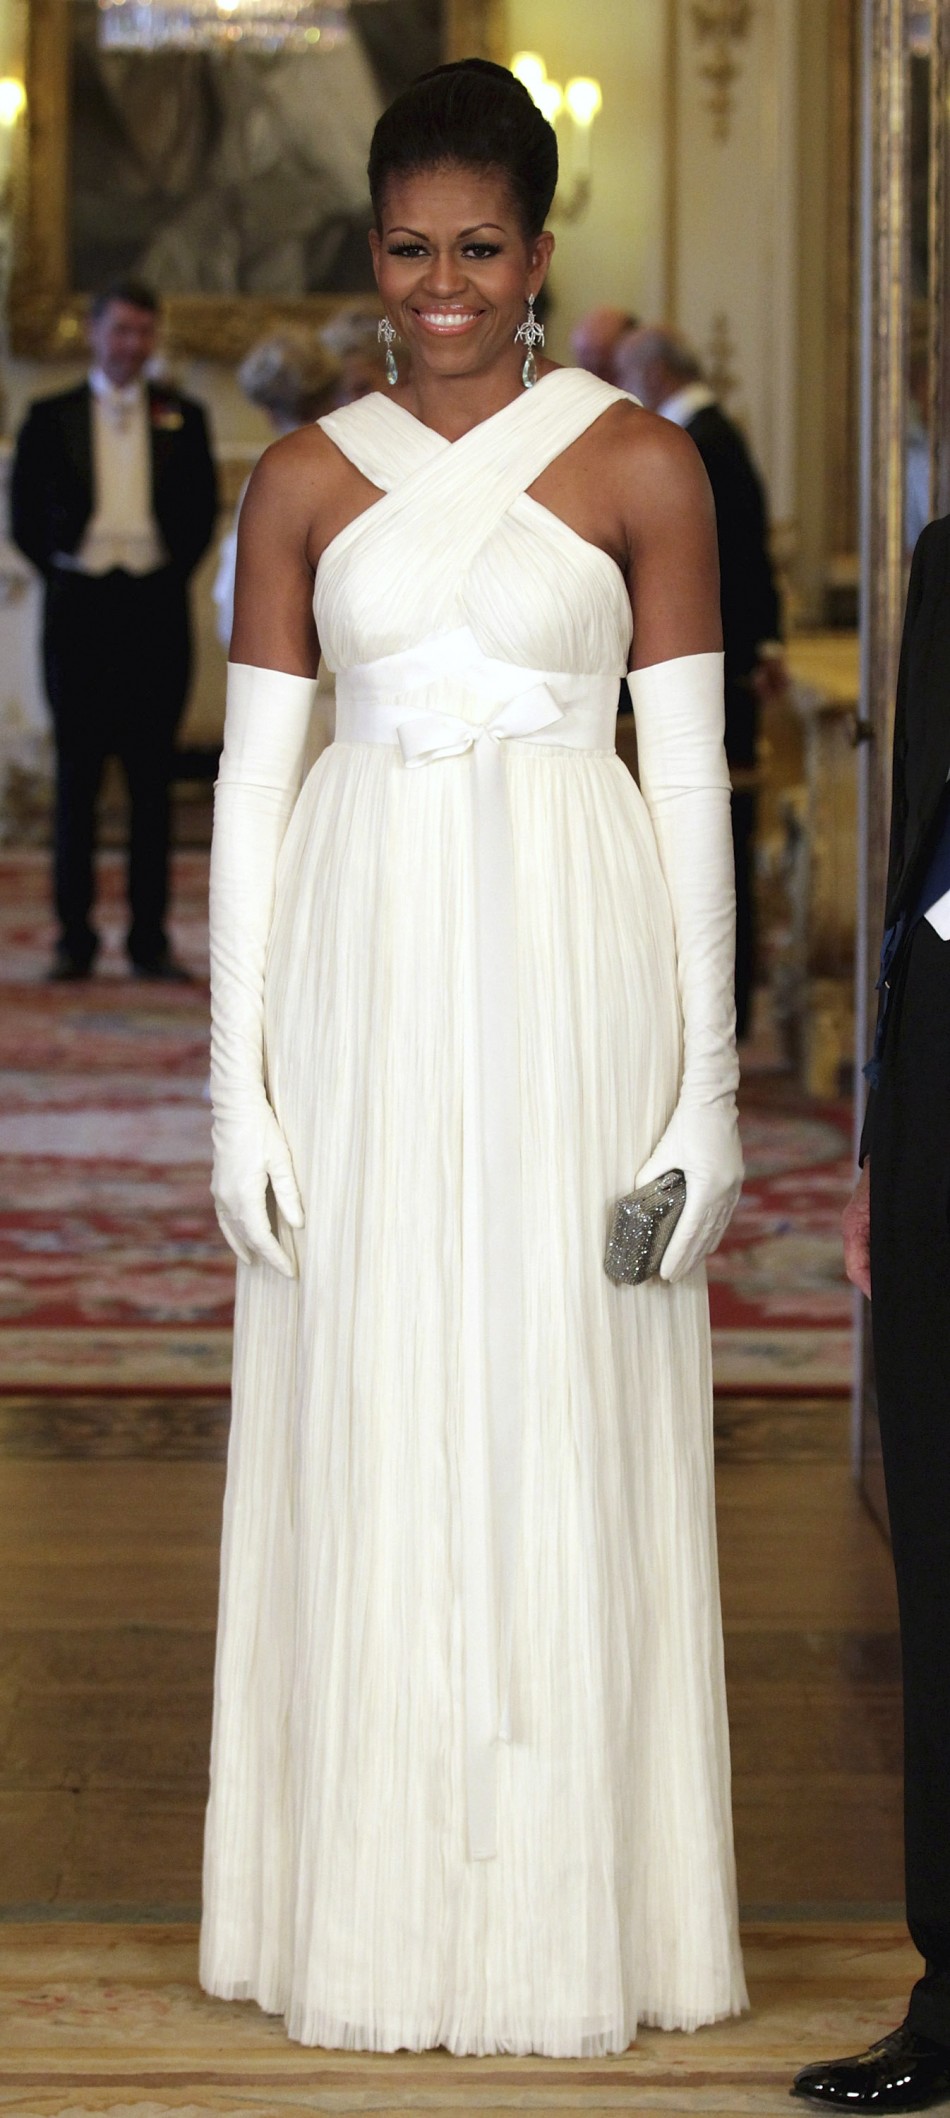 U.S first lady Michelle Obama poses for a photograph before a State Dinner at Buckingham Palace in London